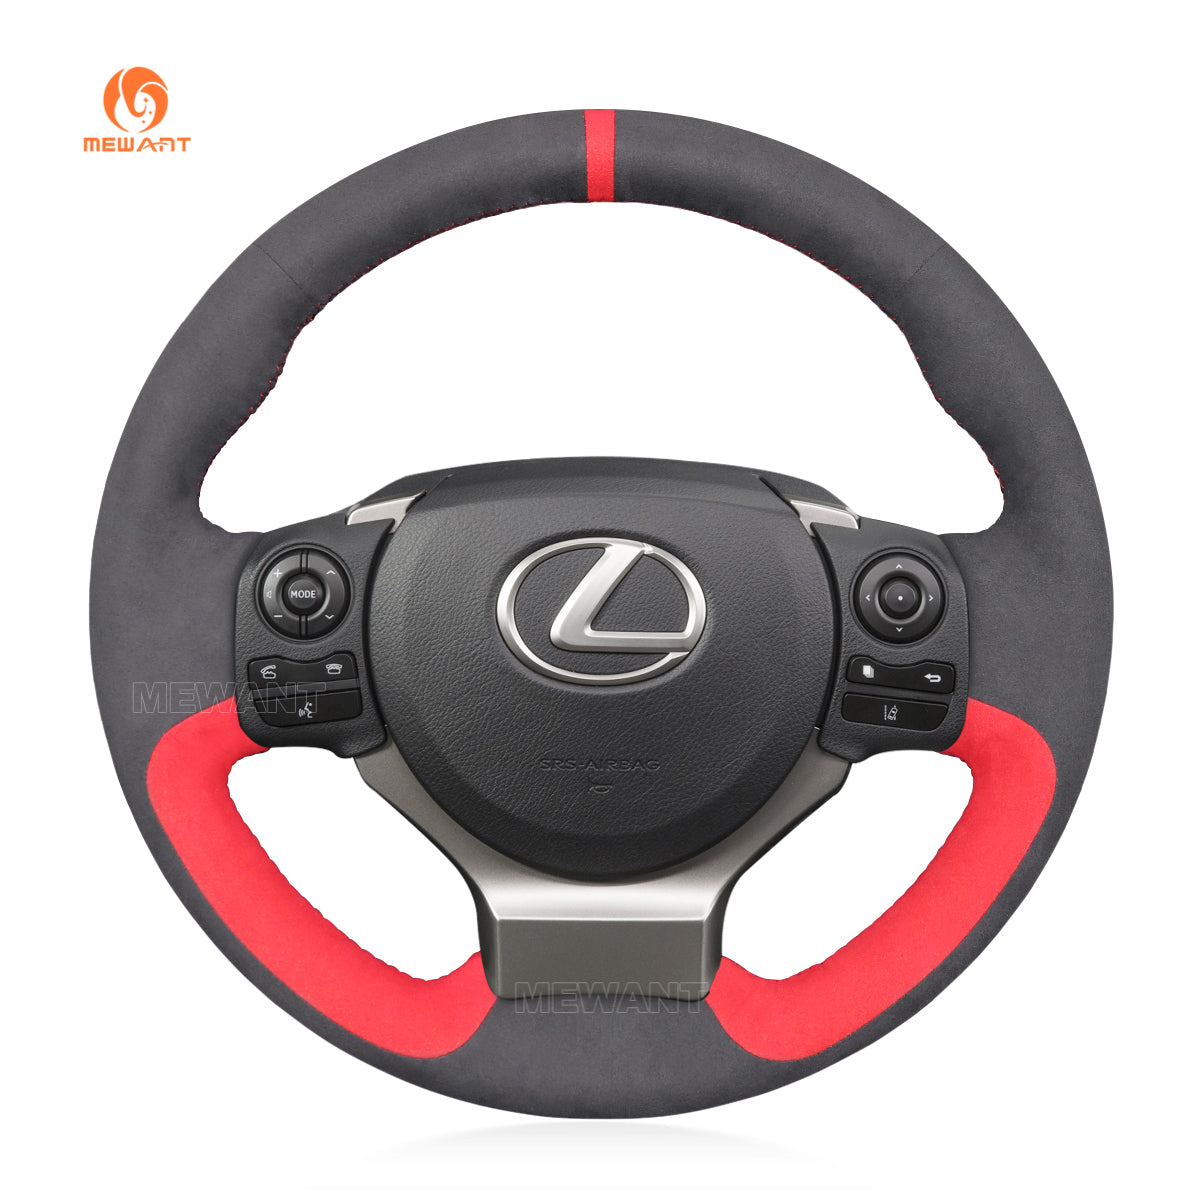 MEWANT Athsuede Car Steering Wheel Cover for Lexus IS 200t 250 300 350 F Sport RC CT 200h NX